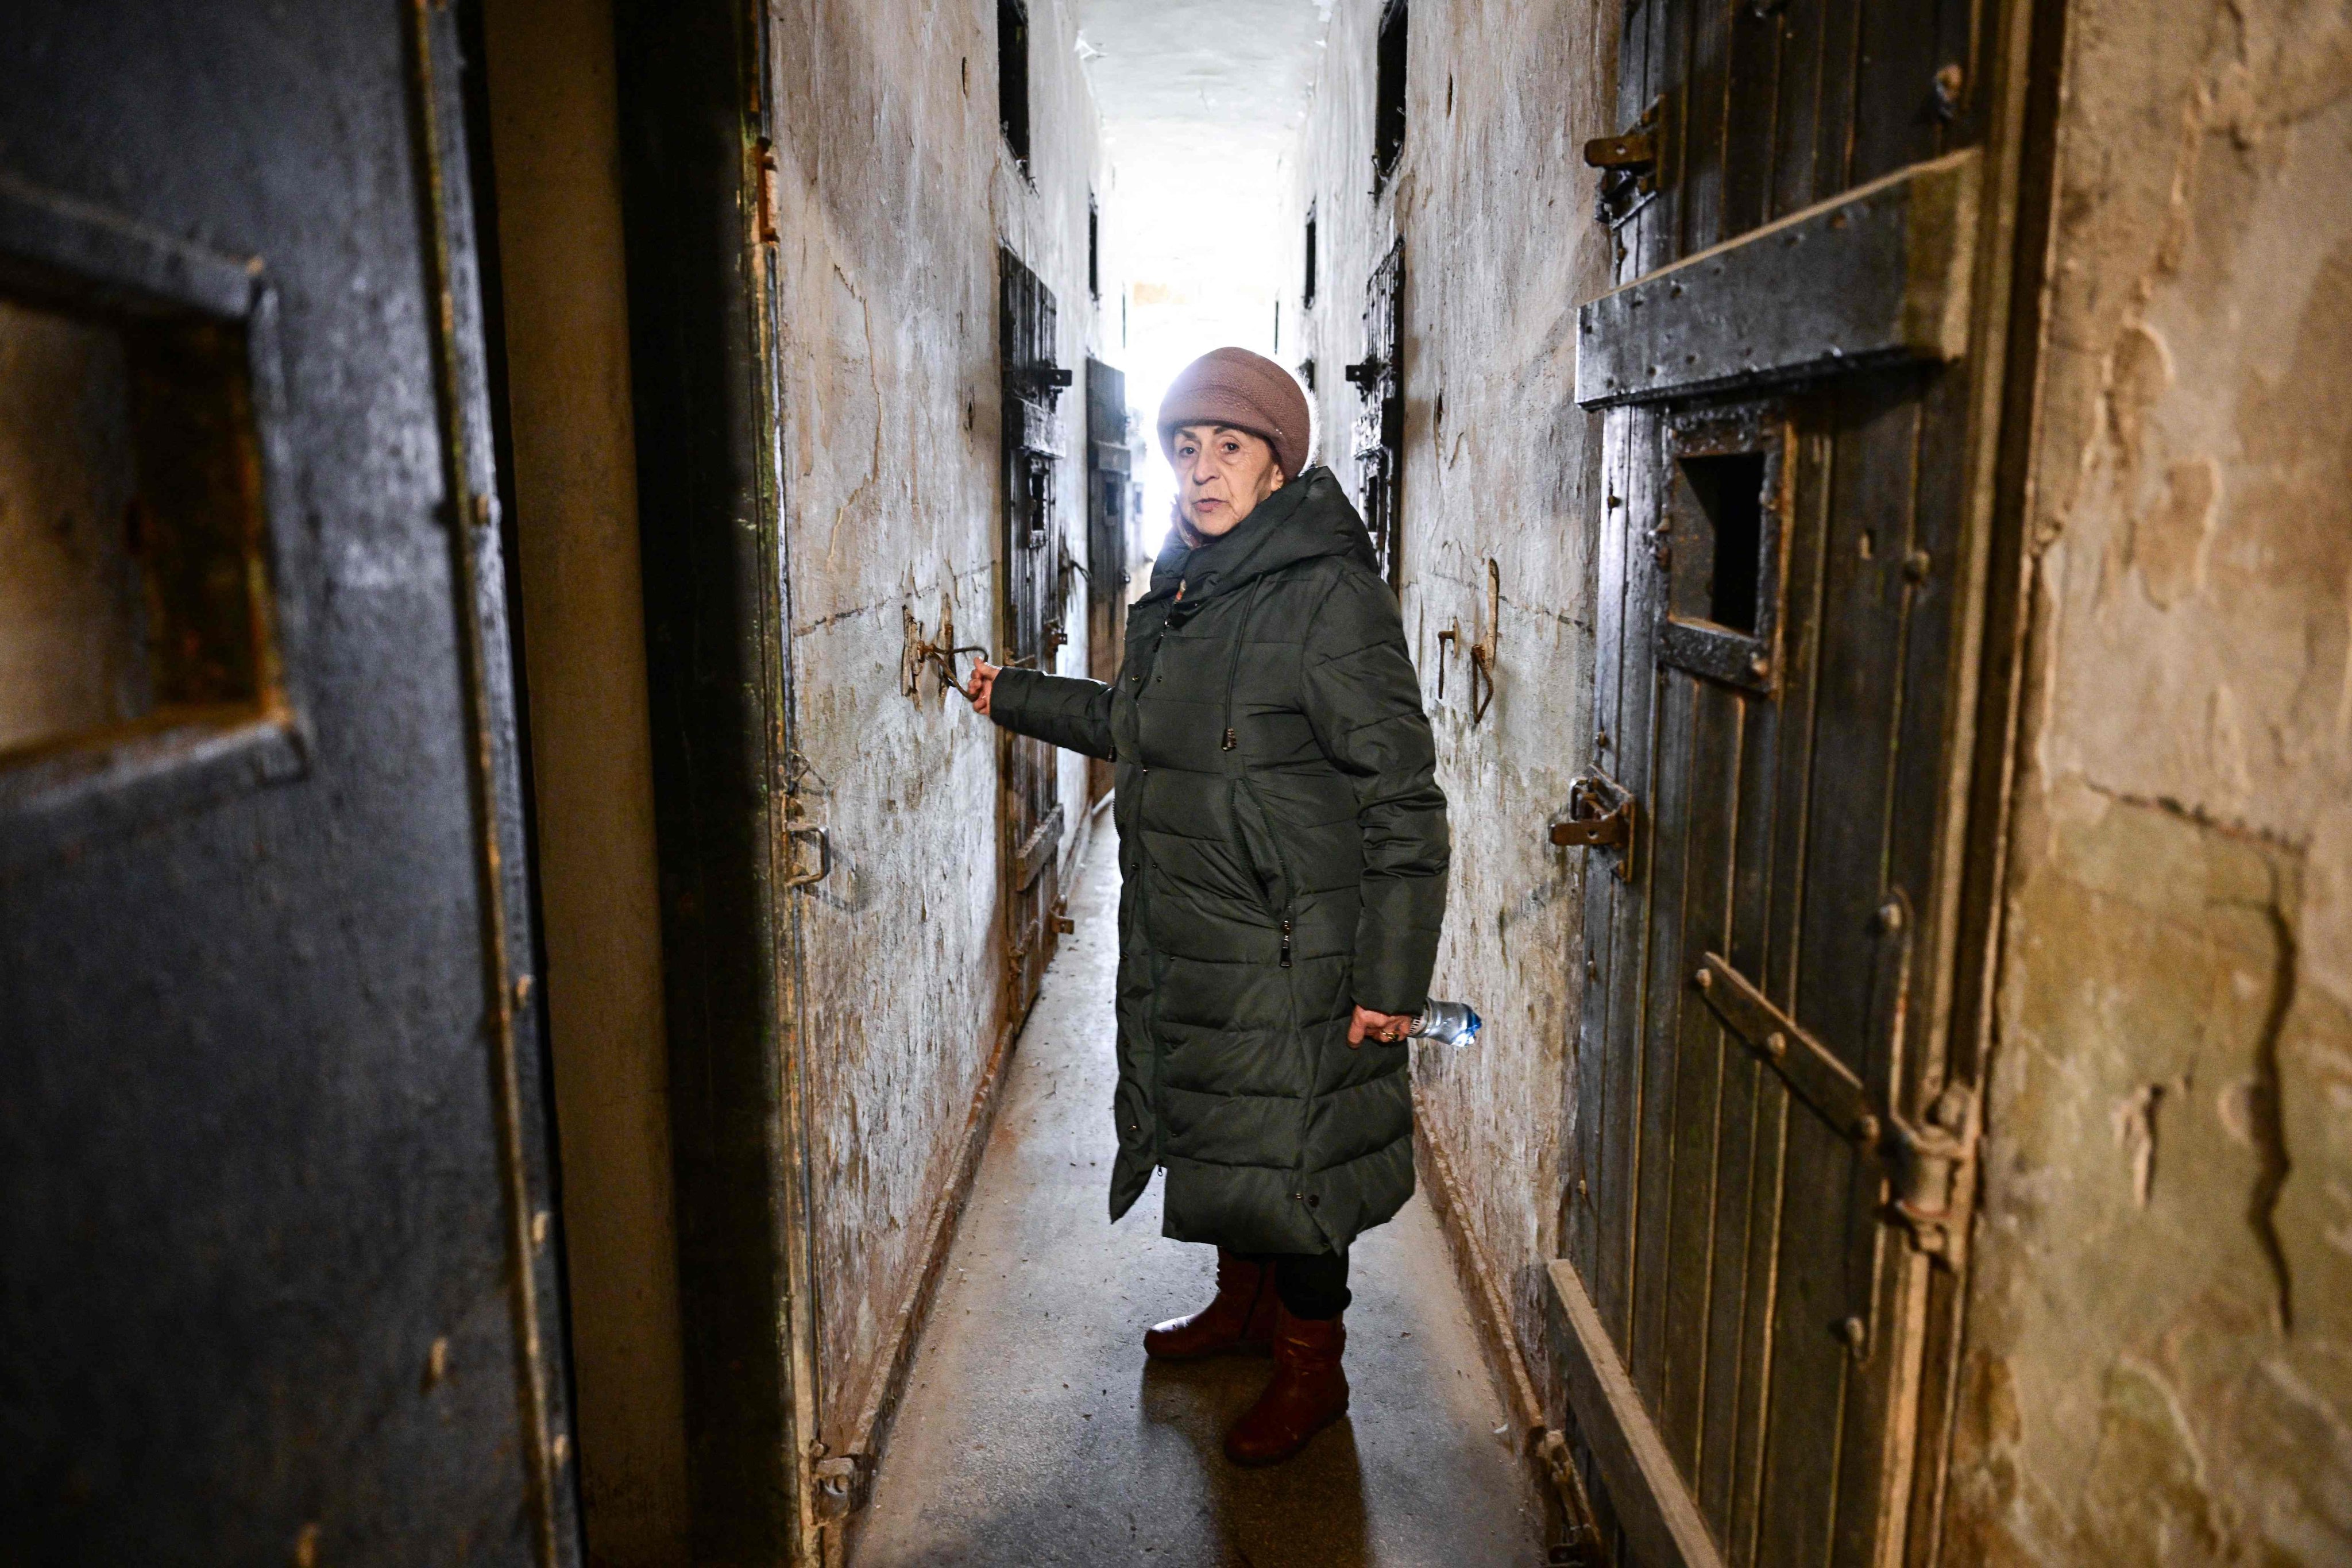 Niculina Moica, 80, detained as a teenager at Jilava prison by Romania’s then Communist regime, shows the isolation cells at Jilava prison, which she is campaigning to have preserved as a monument. Photo: AFP